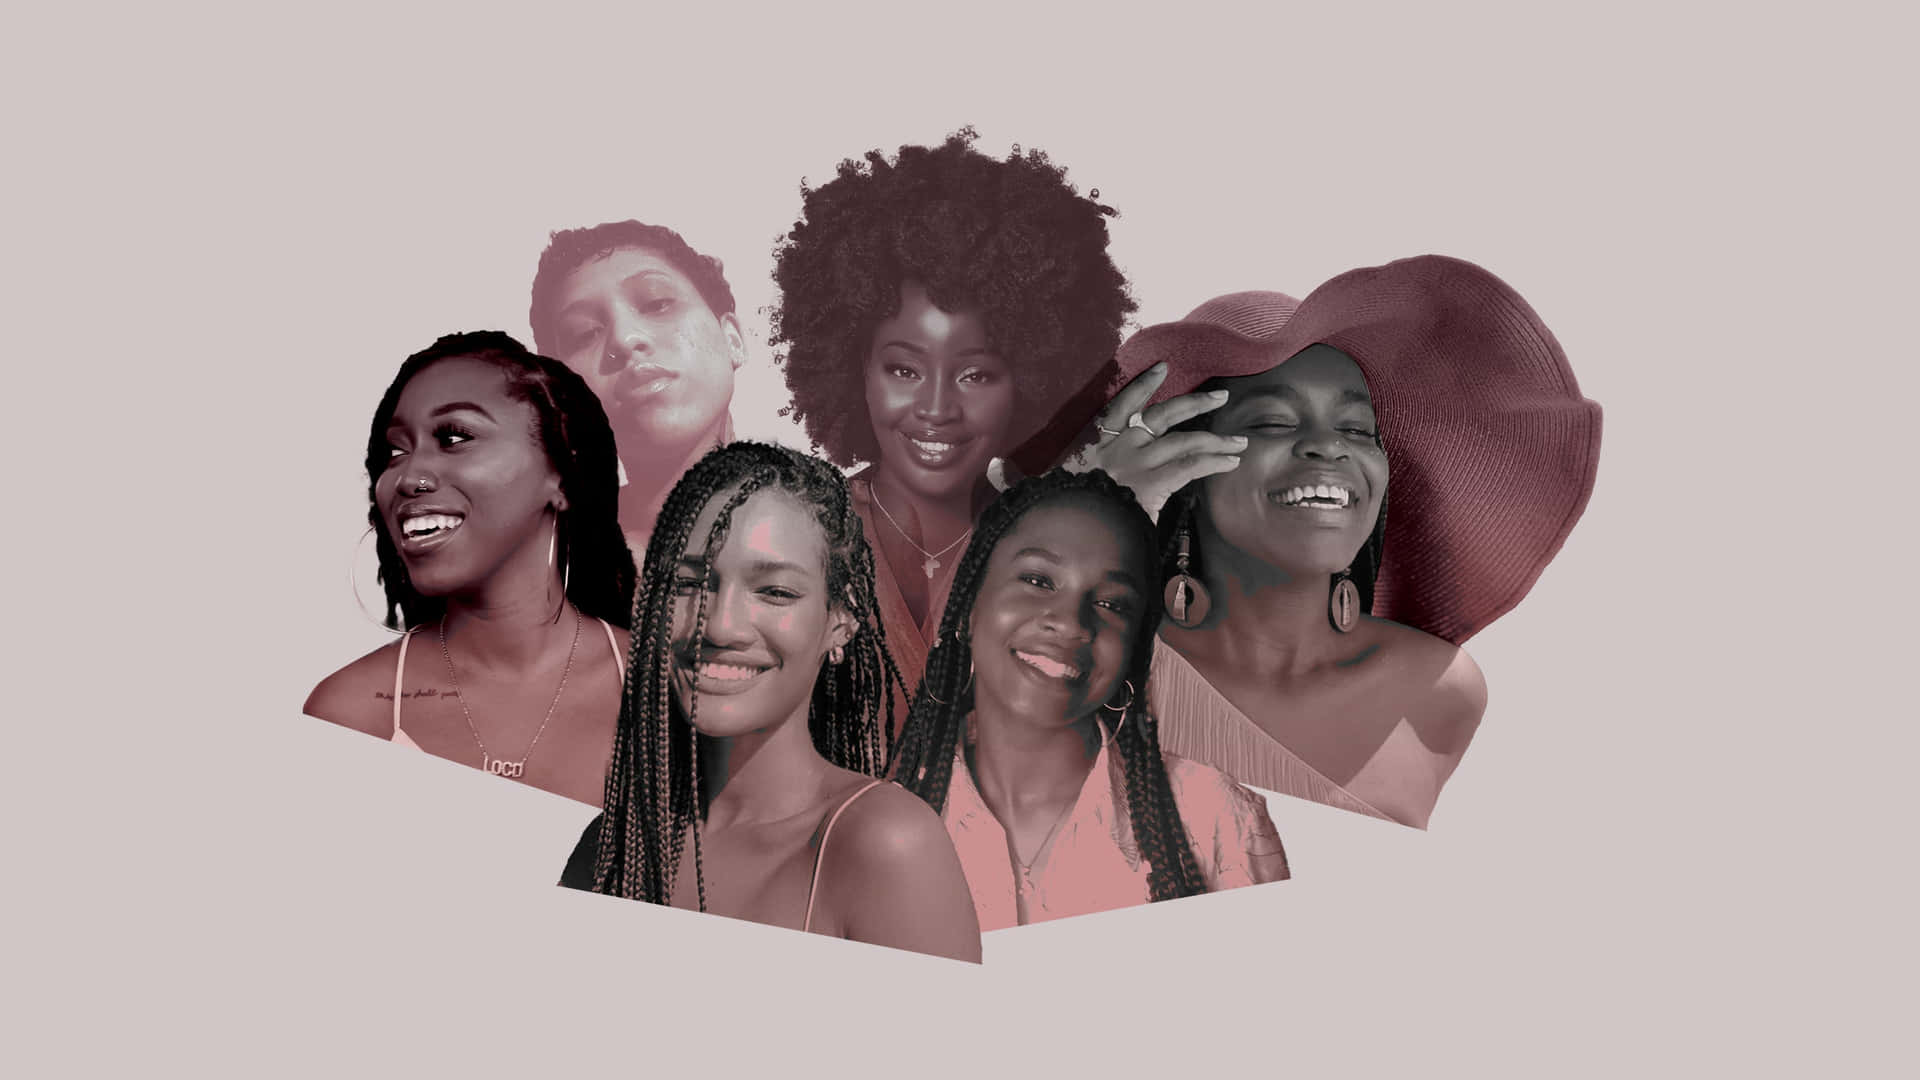 A Collage Of Women With Afro Hair